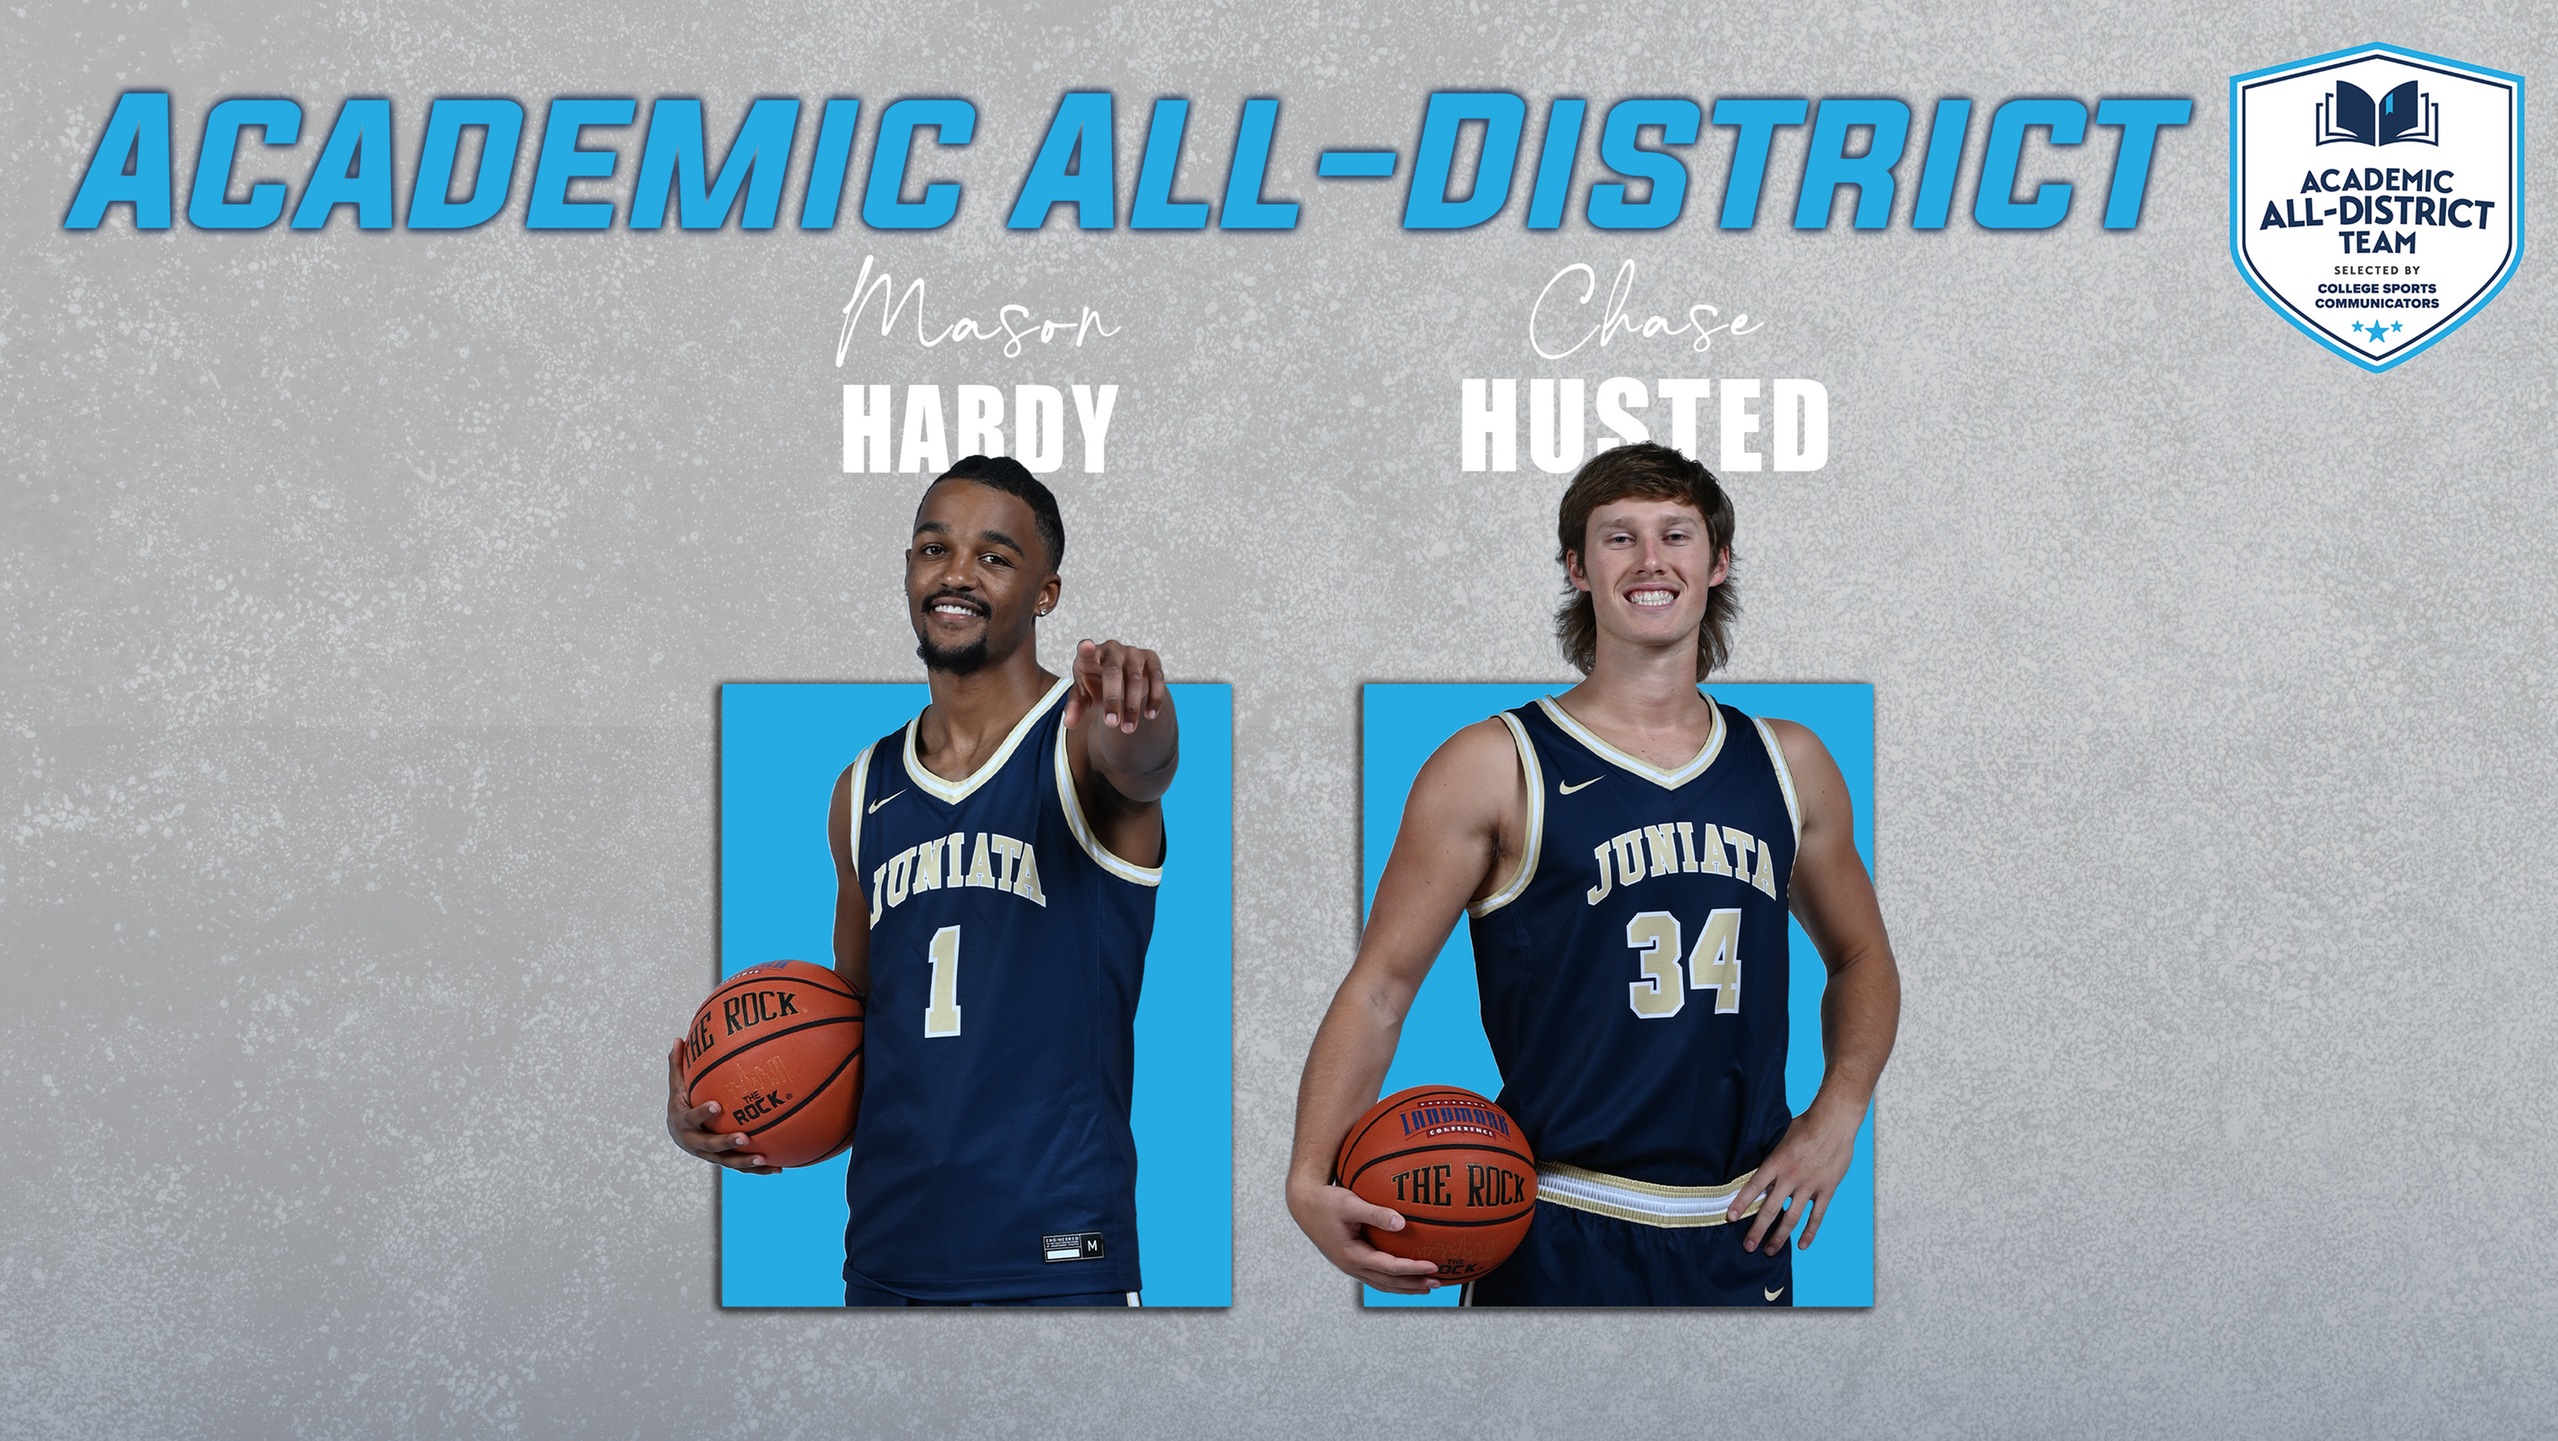 Hardy and Husted Named to CSC Academic All-District® Men's Basketball Team